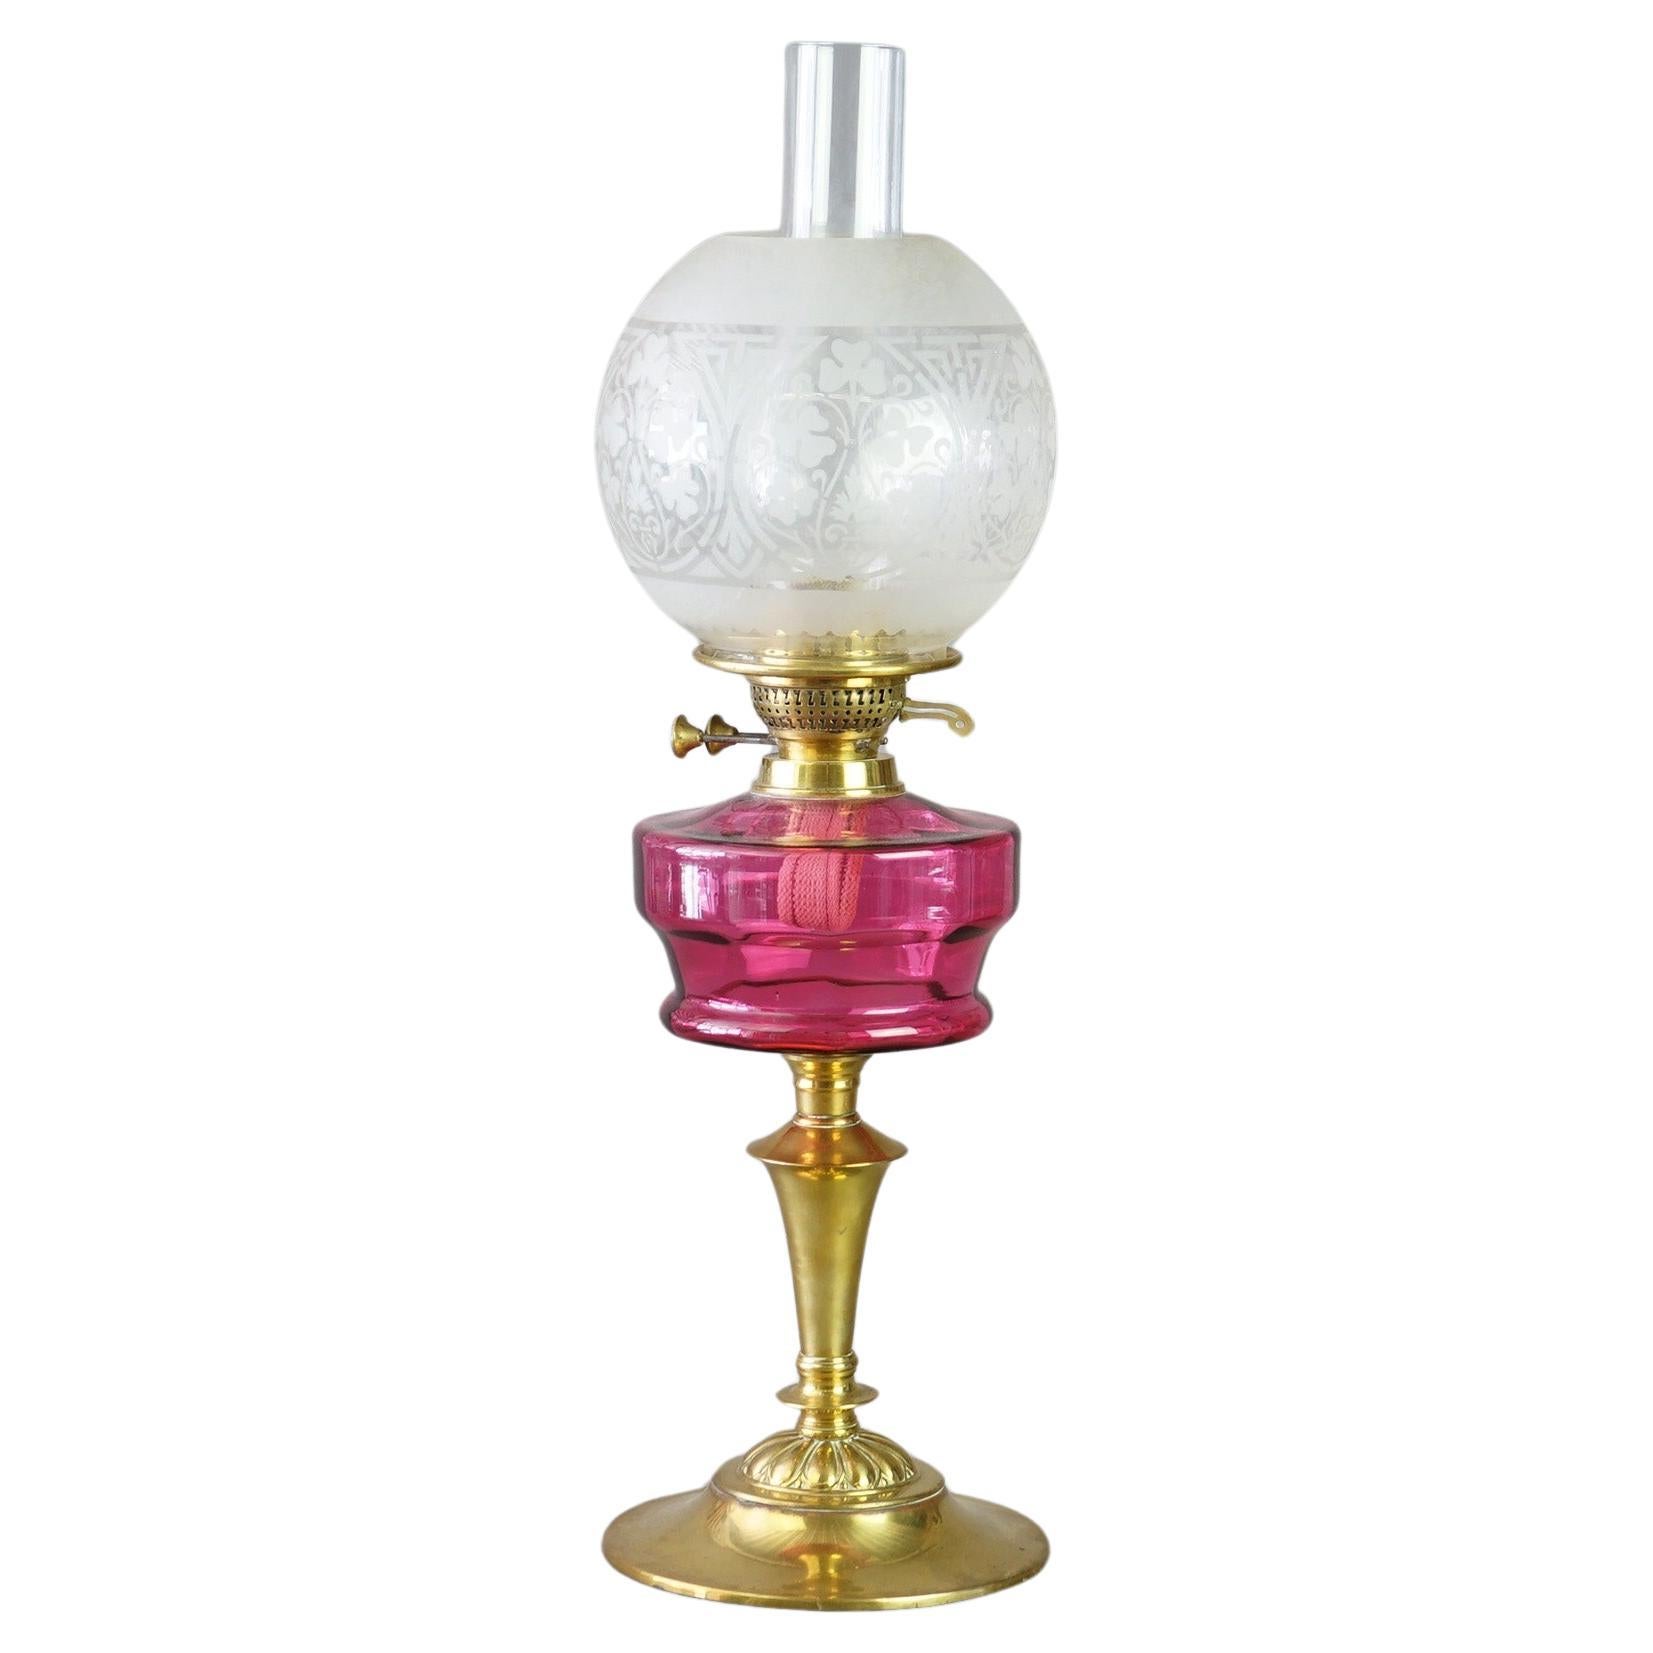 Antique Brass &Cranberry Glass “Gone With The Wind” Oil Lamp C1890 For Sale